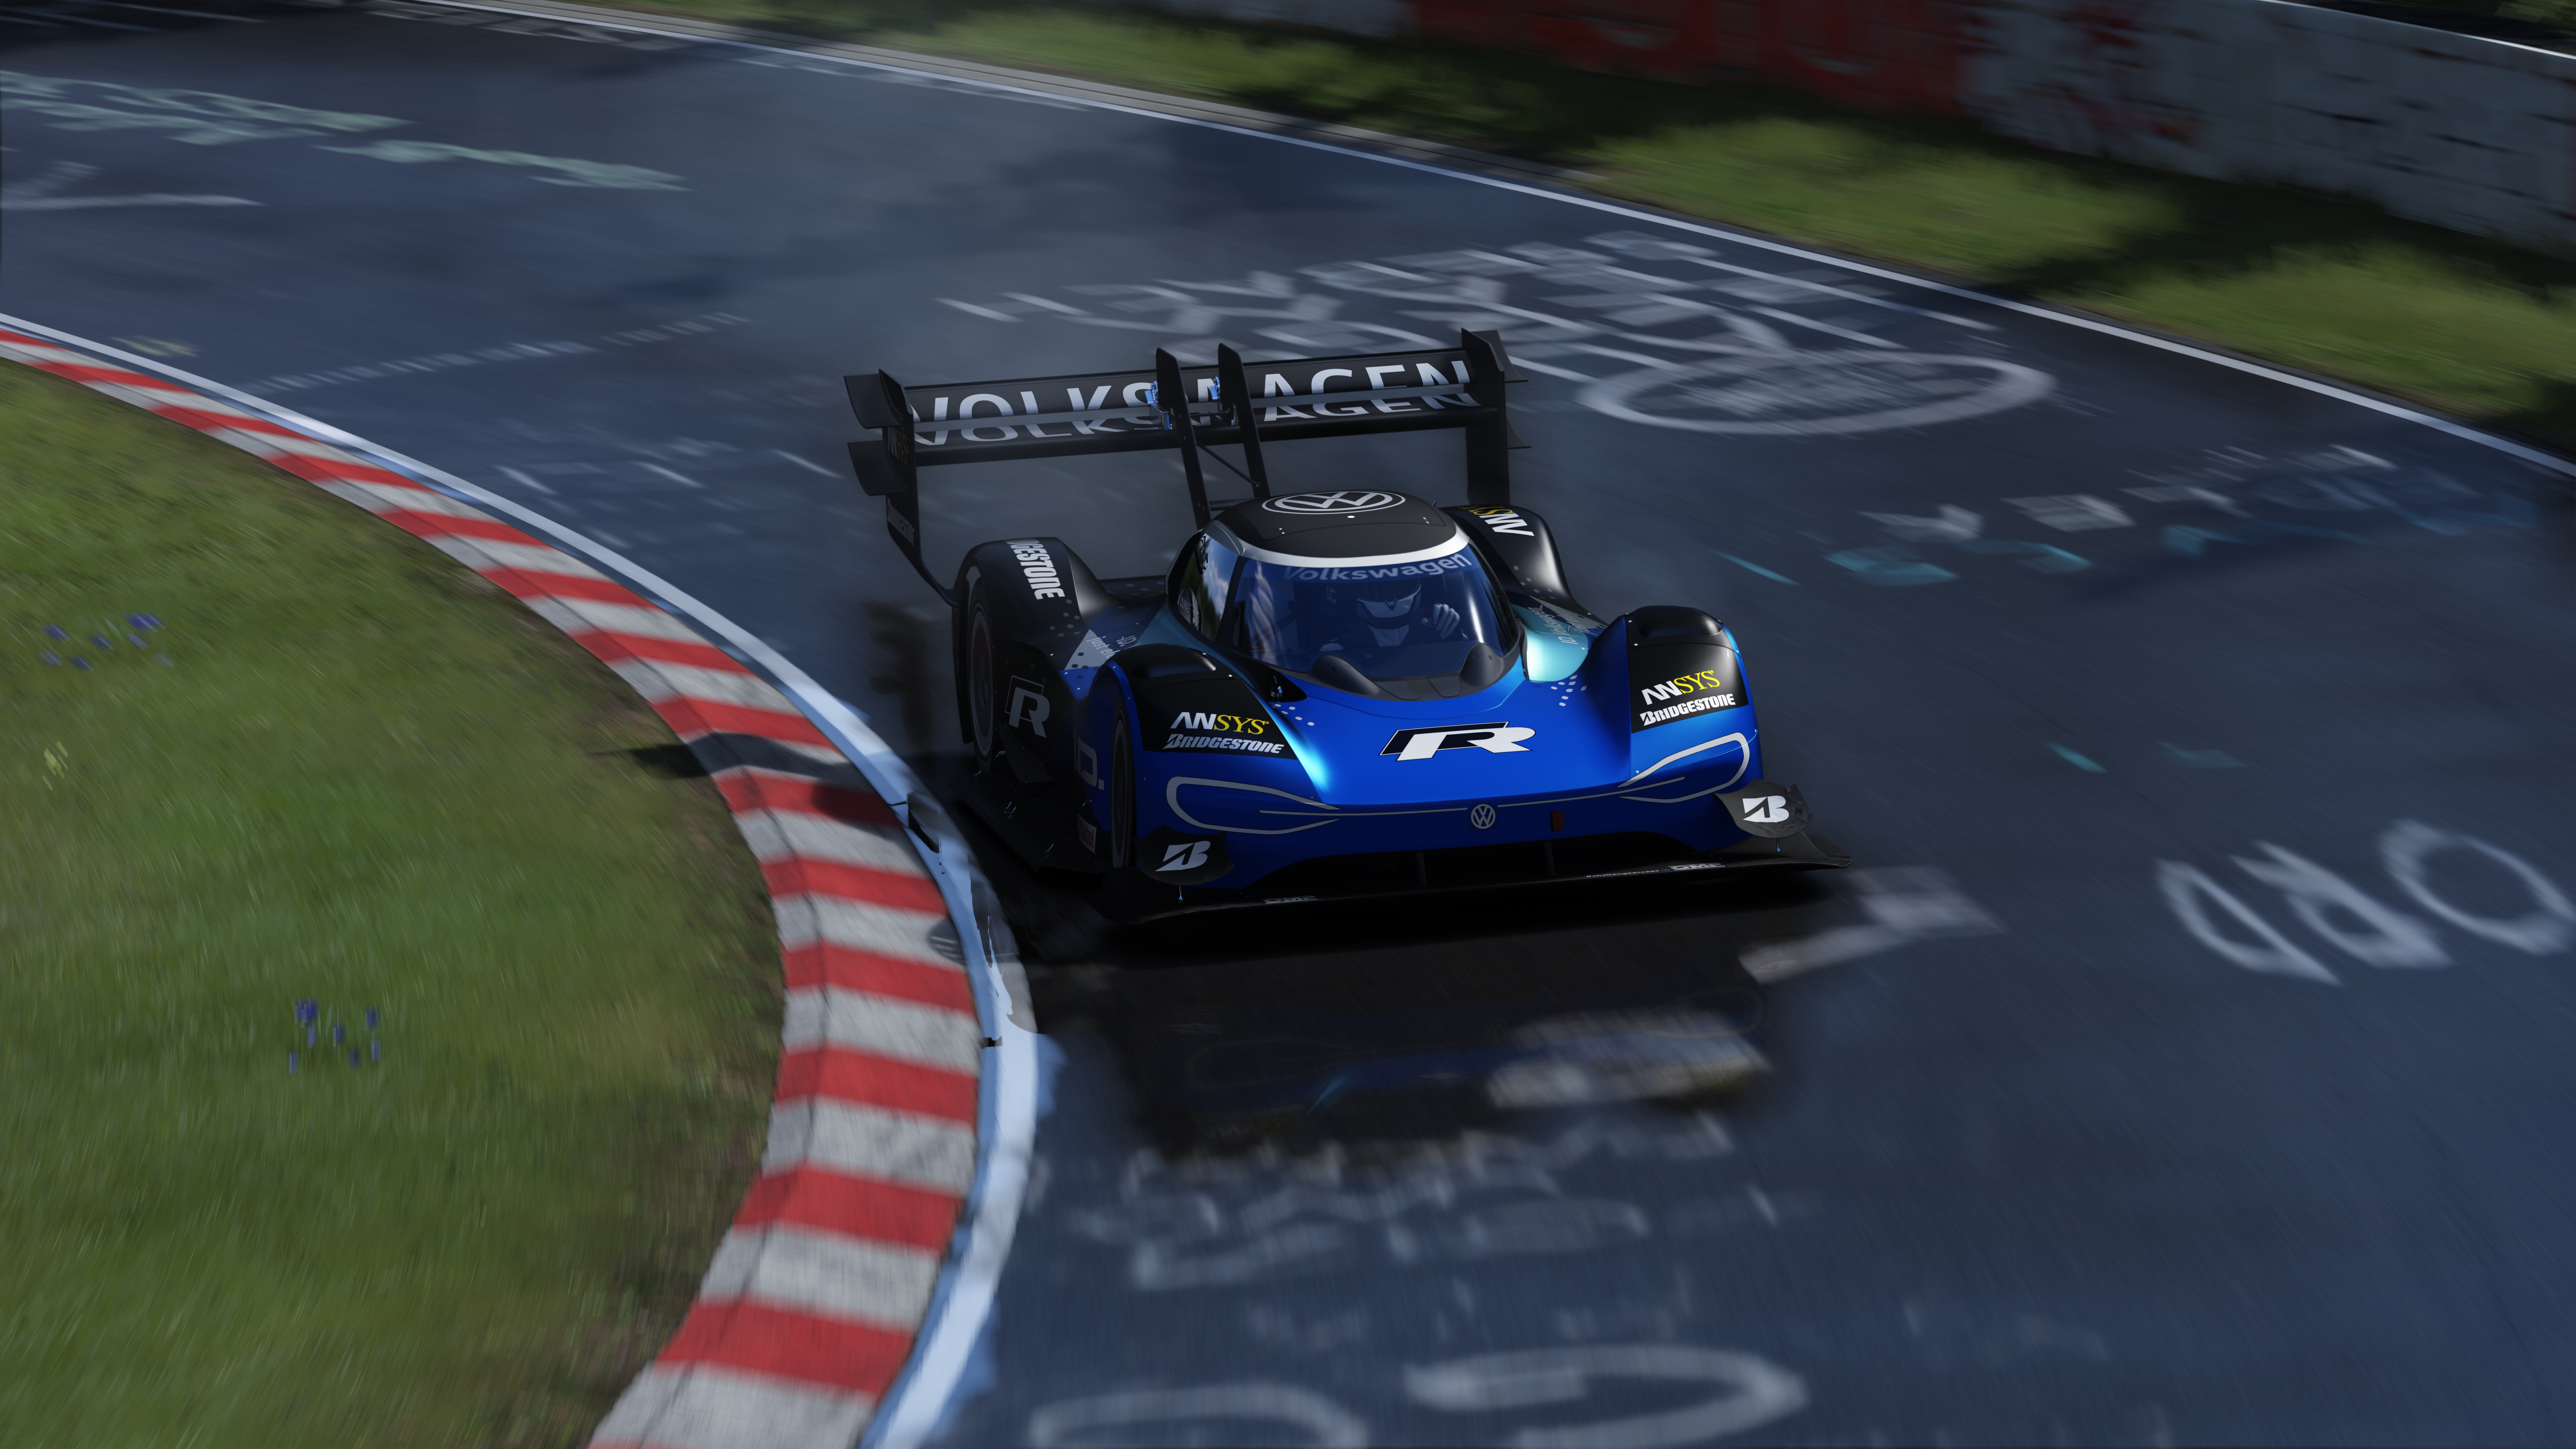 Volkswagen Volkswagen ID R Nurburgring Assetto Corsa Sunny After Rain Race Cars PC Gaming German Car 7680x4320